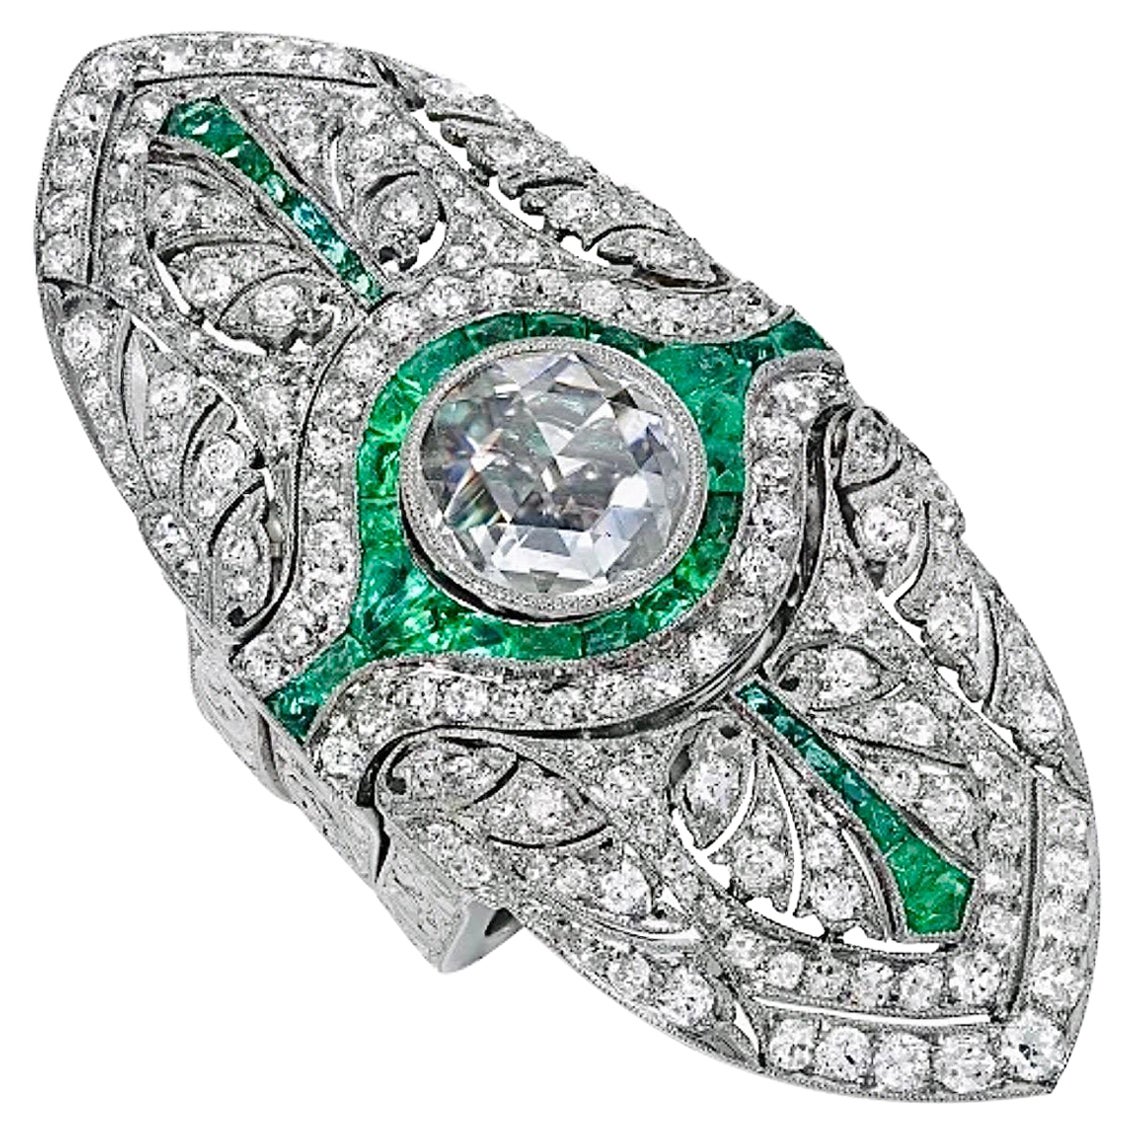 This one-of-a-kind, art deco diamond and emerald ring was originally a brooch from the 1930’s. The center rose-cut diamond is a beautiful 1.43-carat E/ VS2 diamond, GIA certified.
The piece is made in platinum with intricate artisan hand engraving